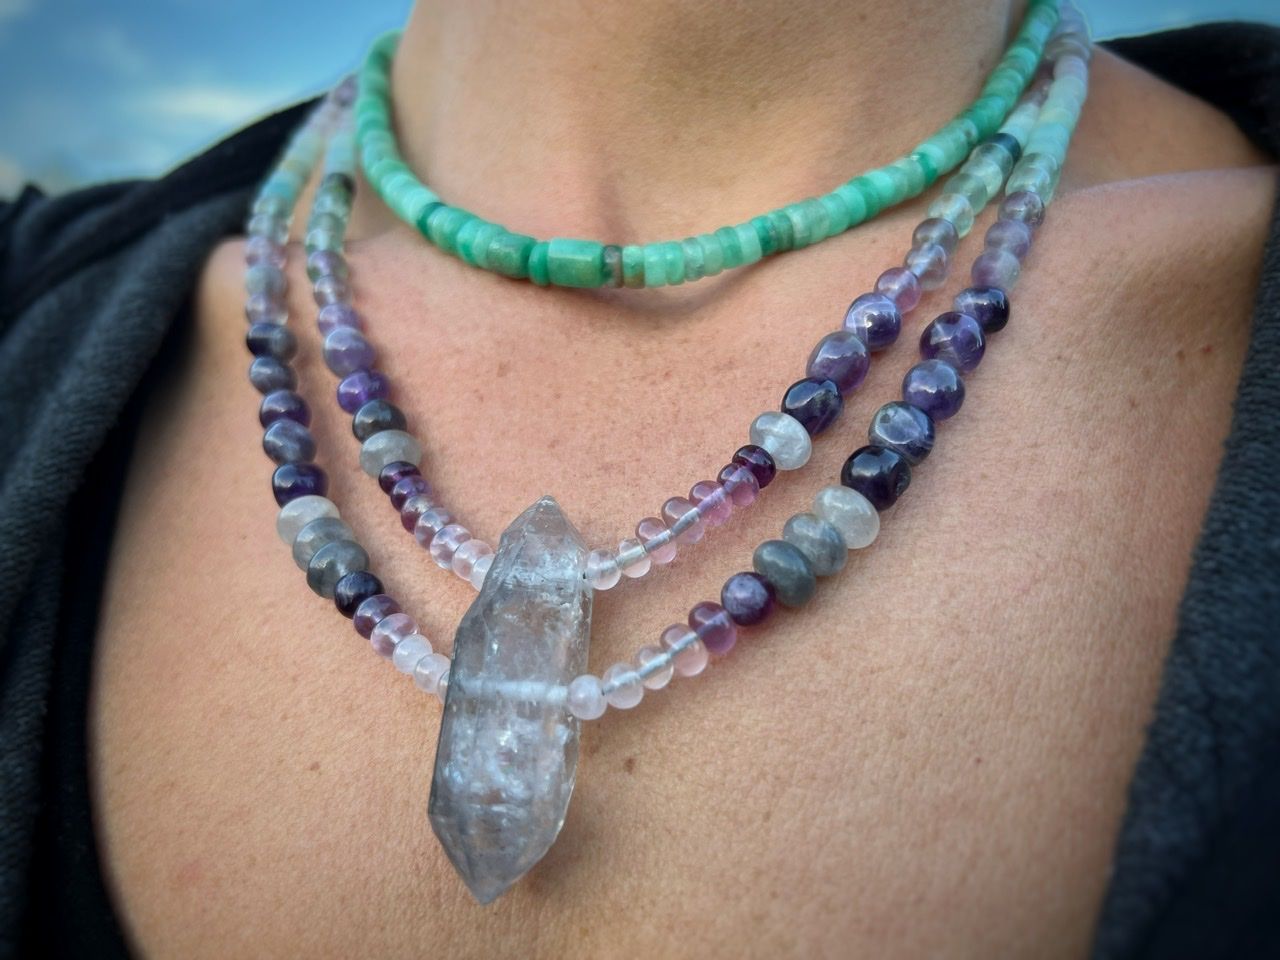 A detail of a woman wearing A necklace of clear, pink and grey Quartz, purple amethyst, green fluorite and blue chalcedony